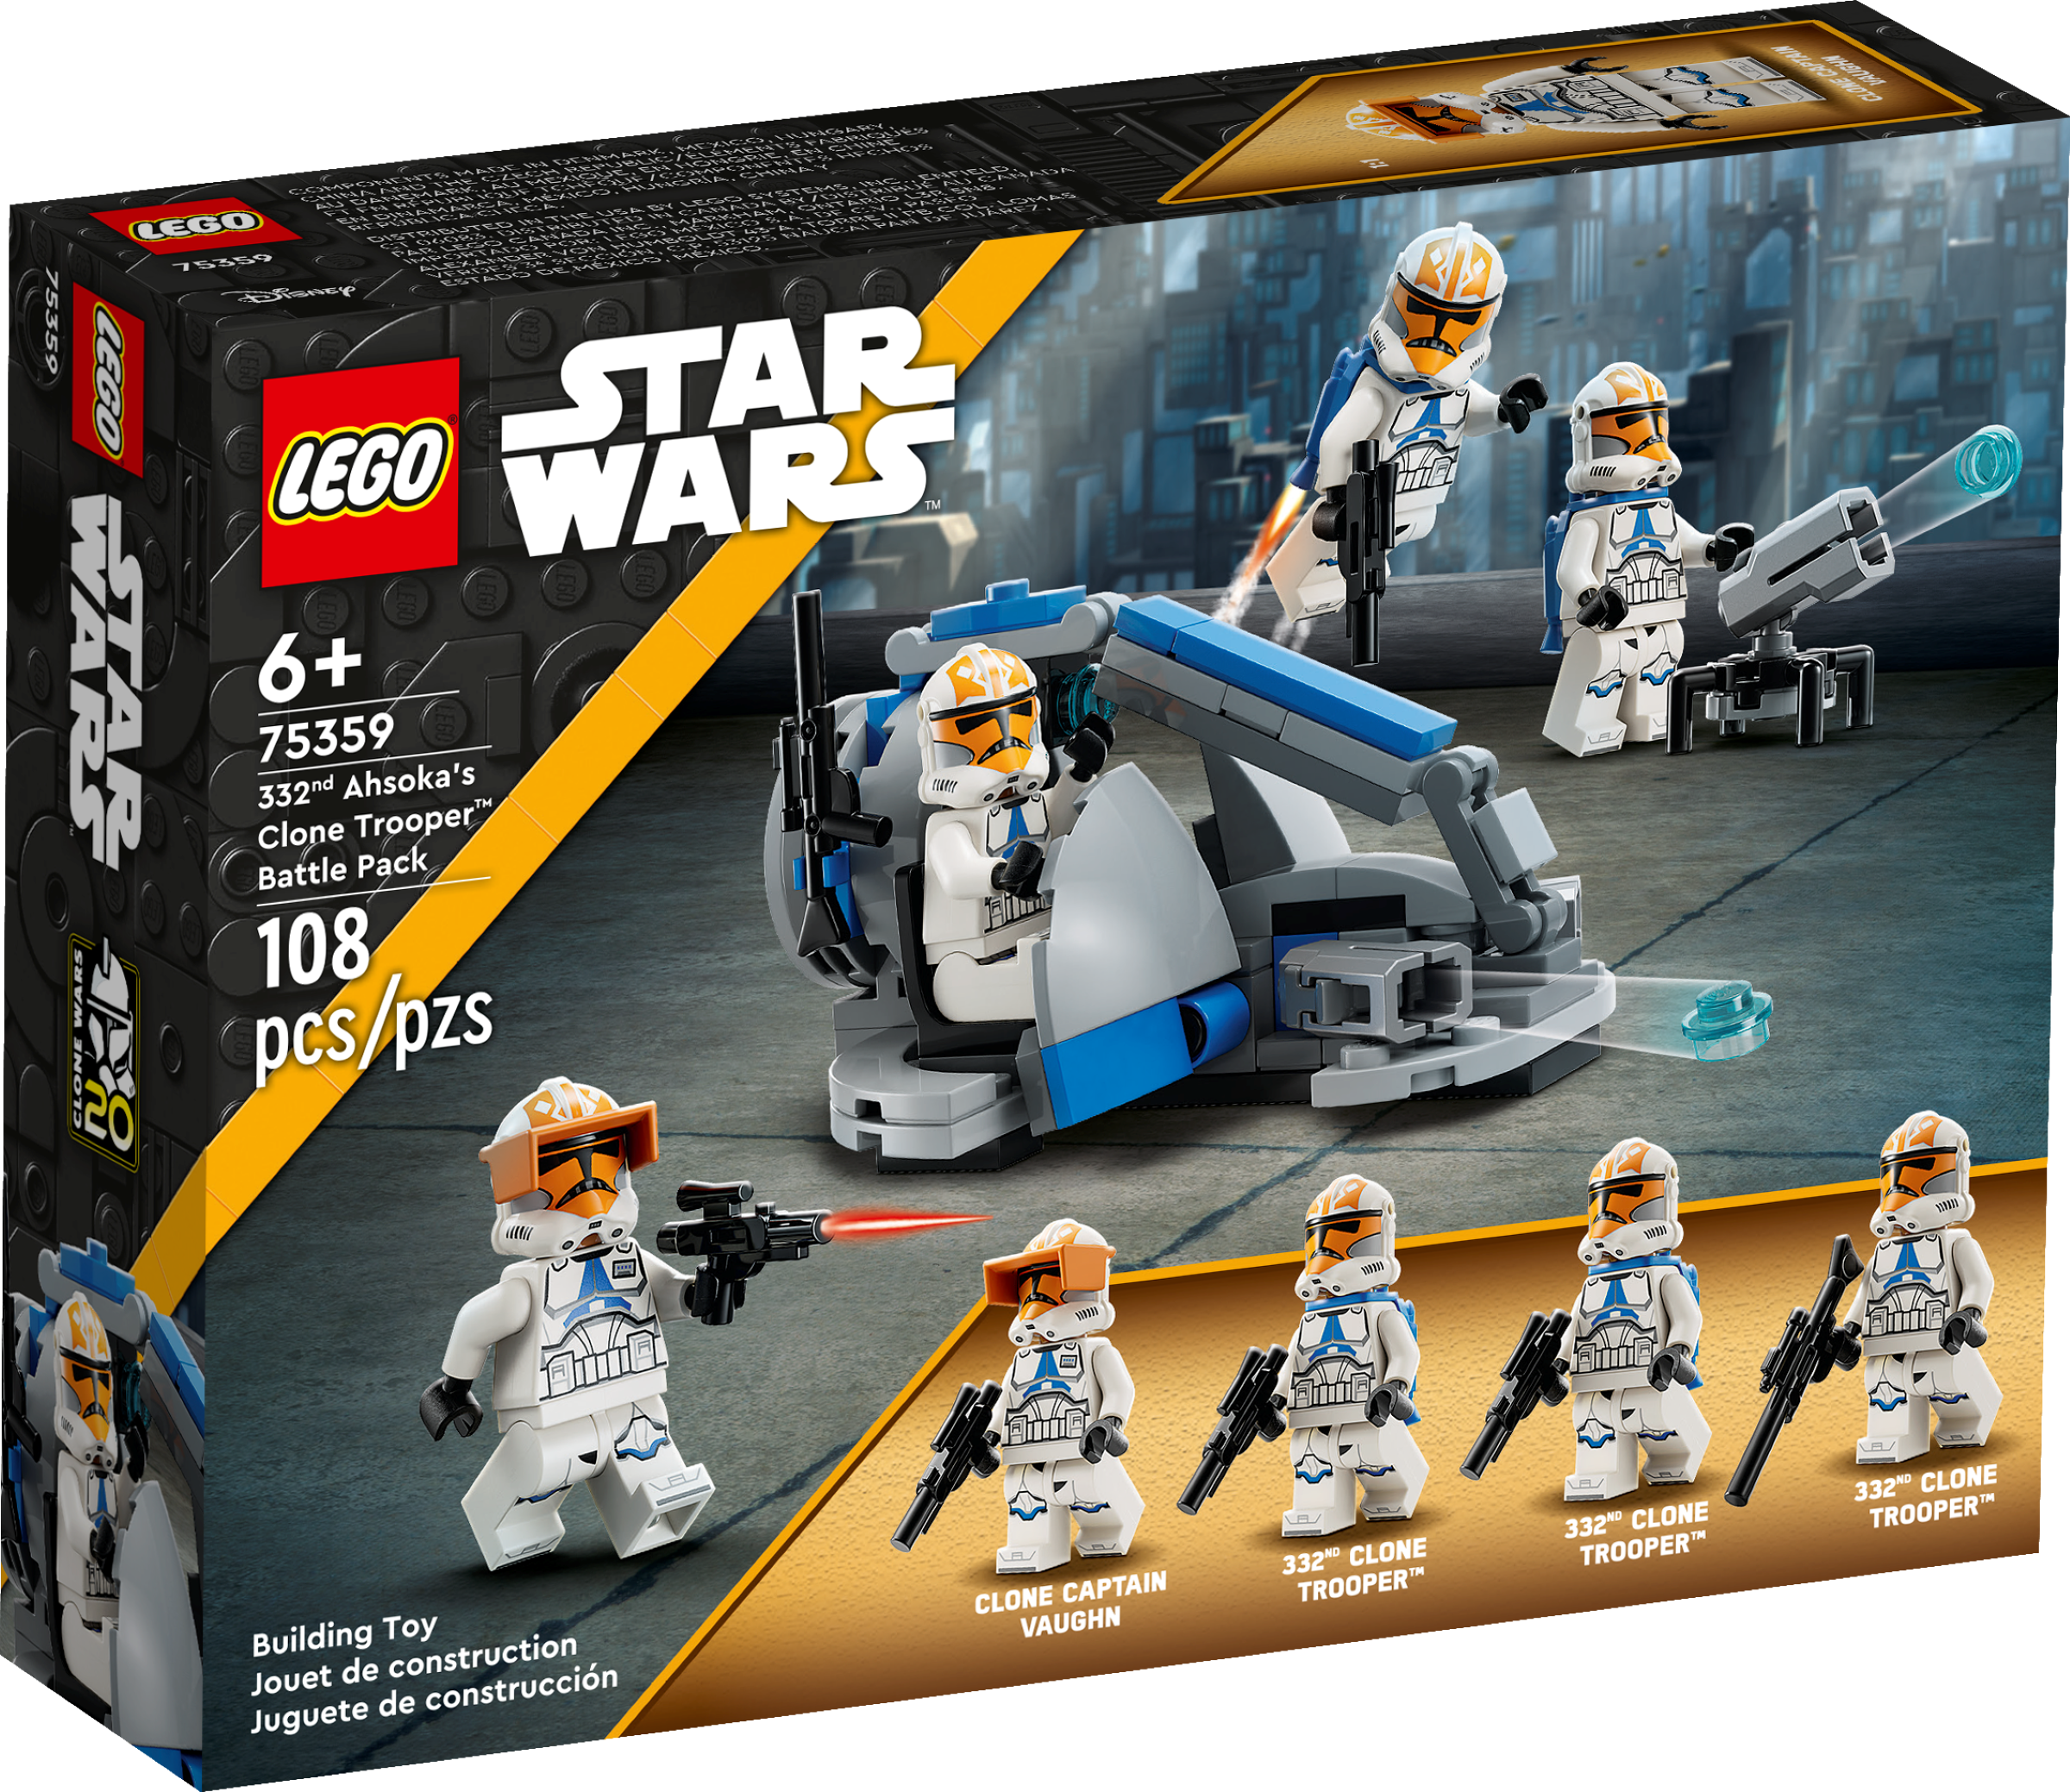 Pin by levi poep on Quick saves  Lego construction, Lego, Clone wars